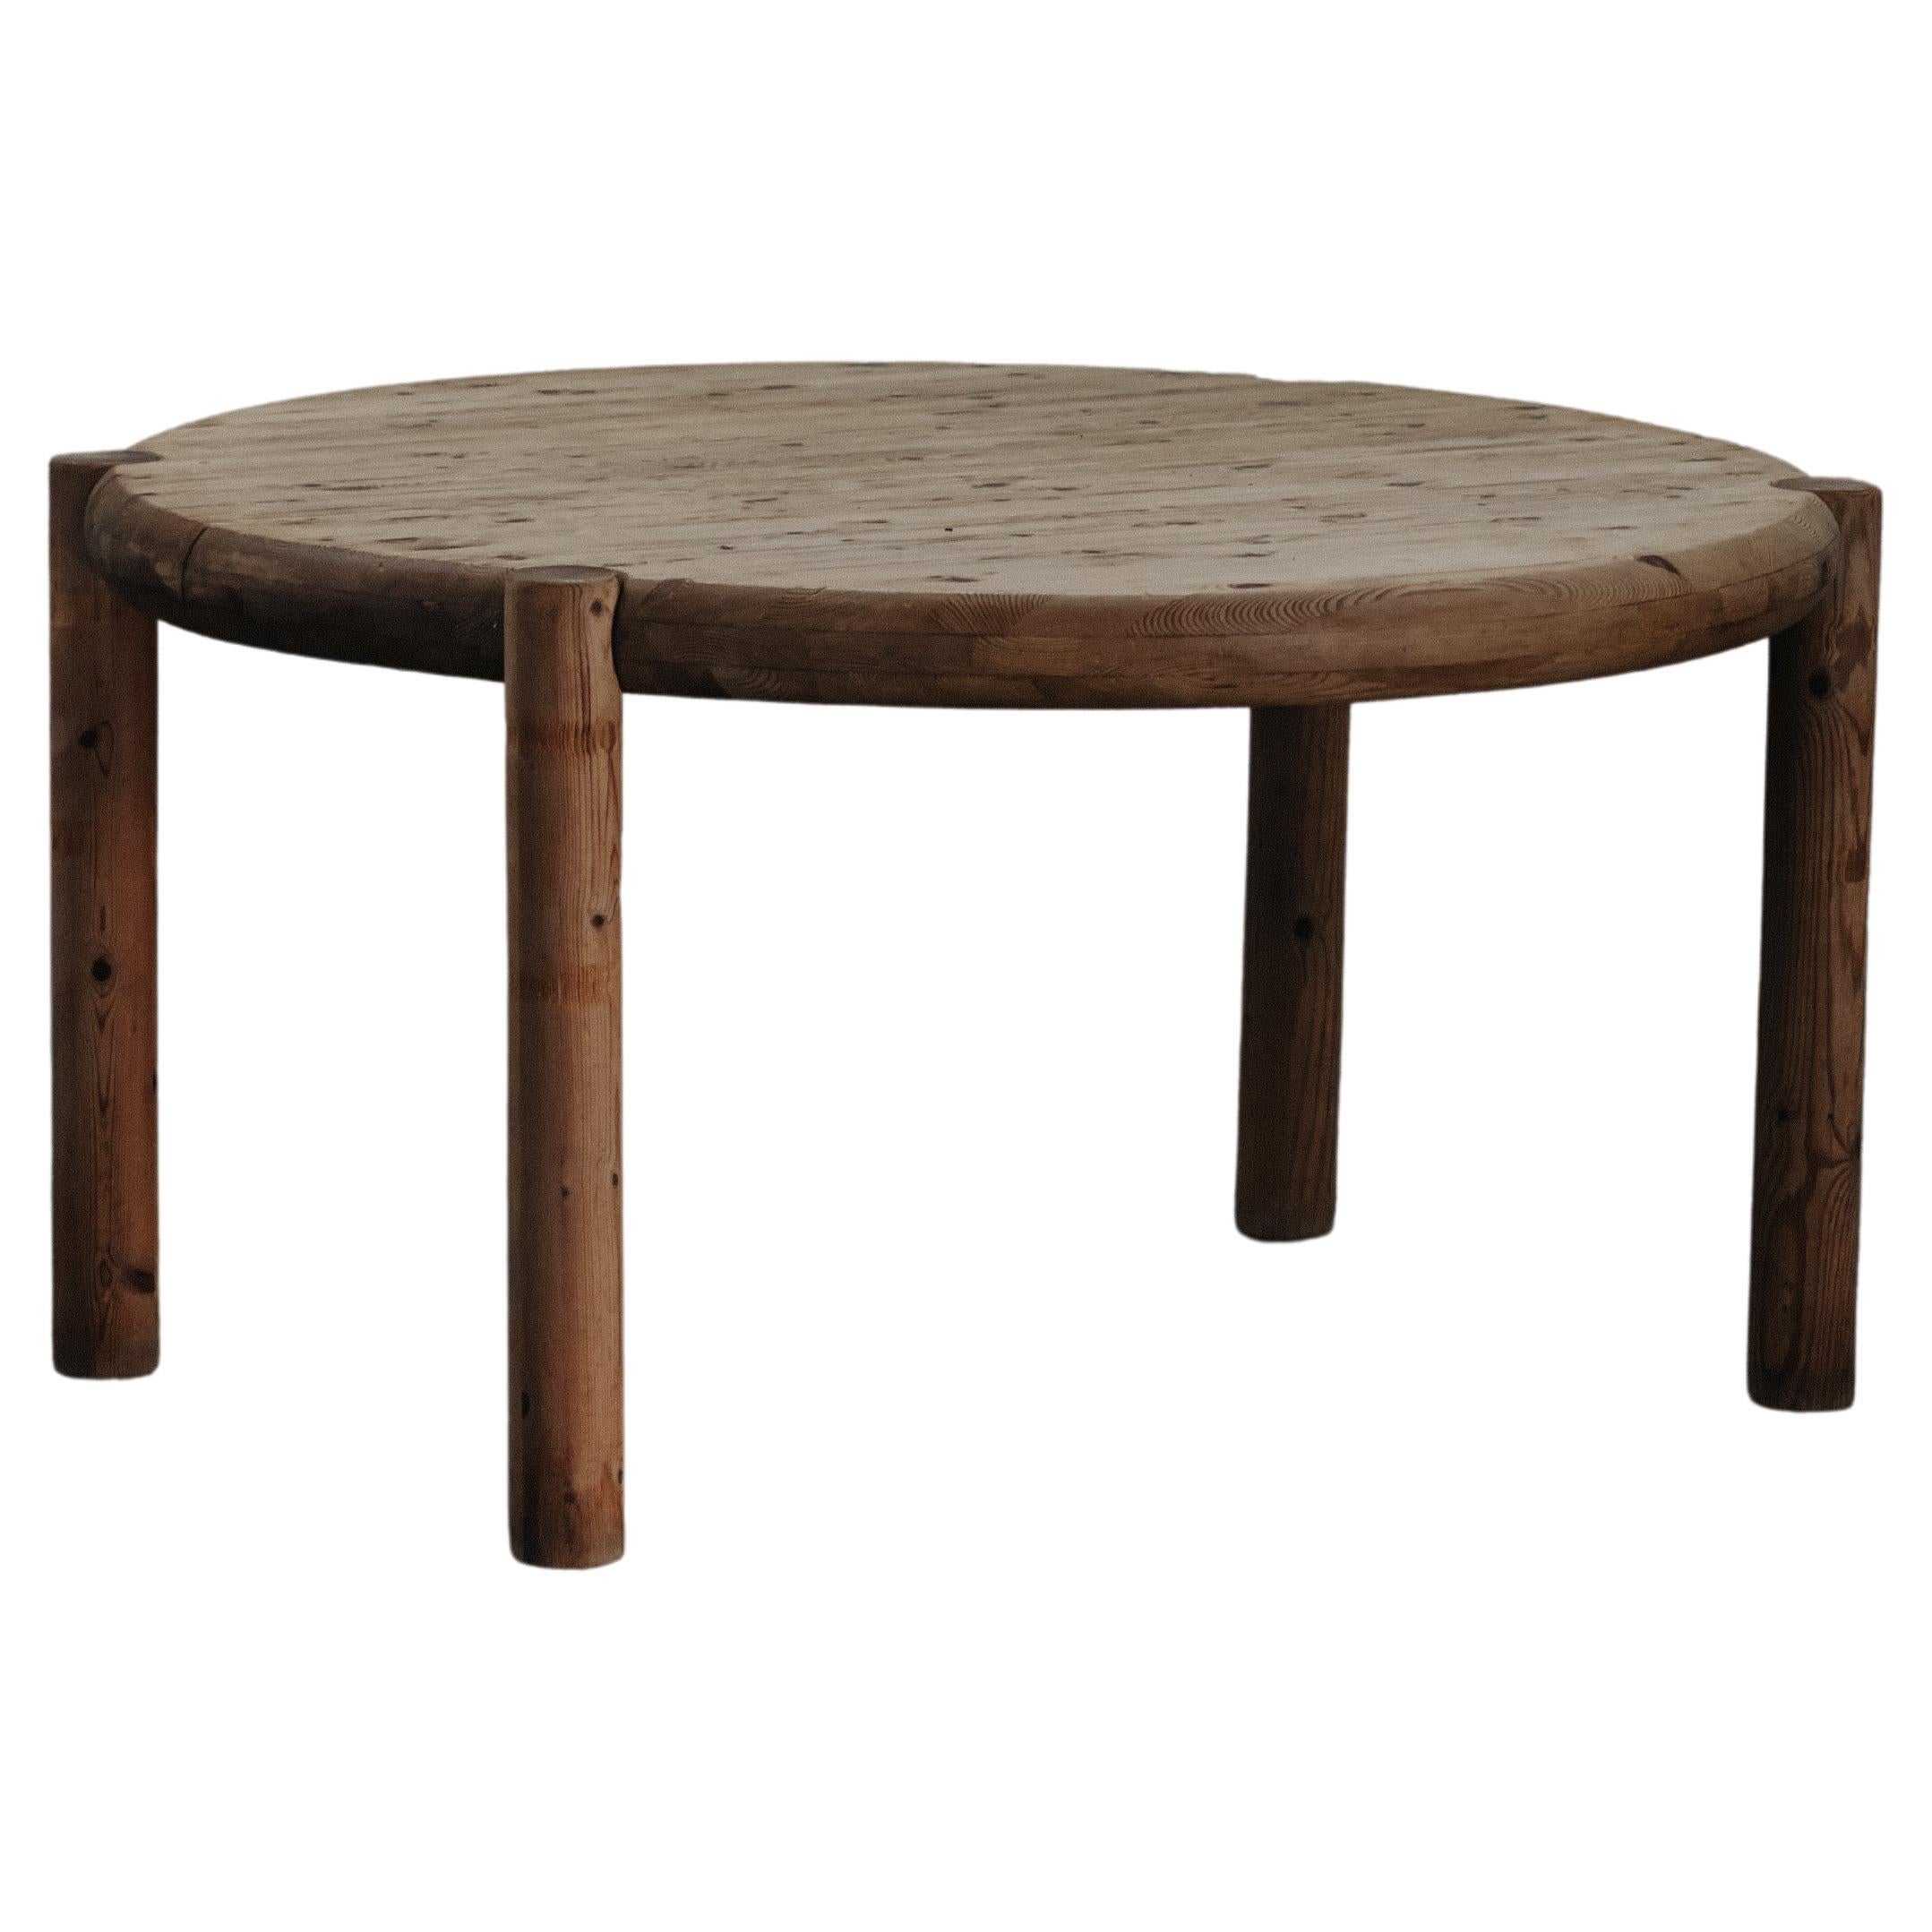 Vintage Pine Dining Table From Denmark, Circa 1970 For Sale